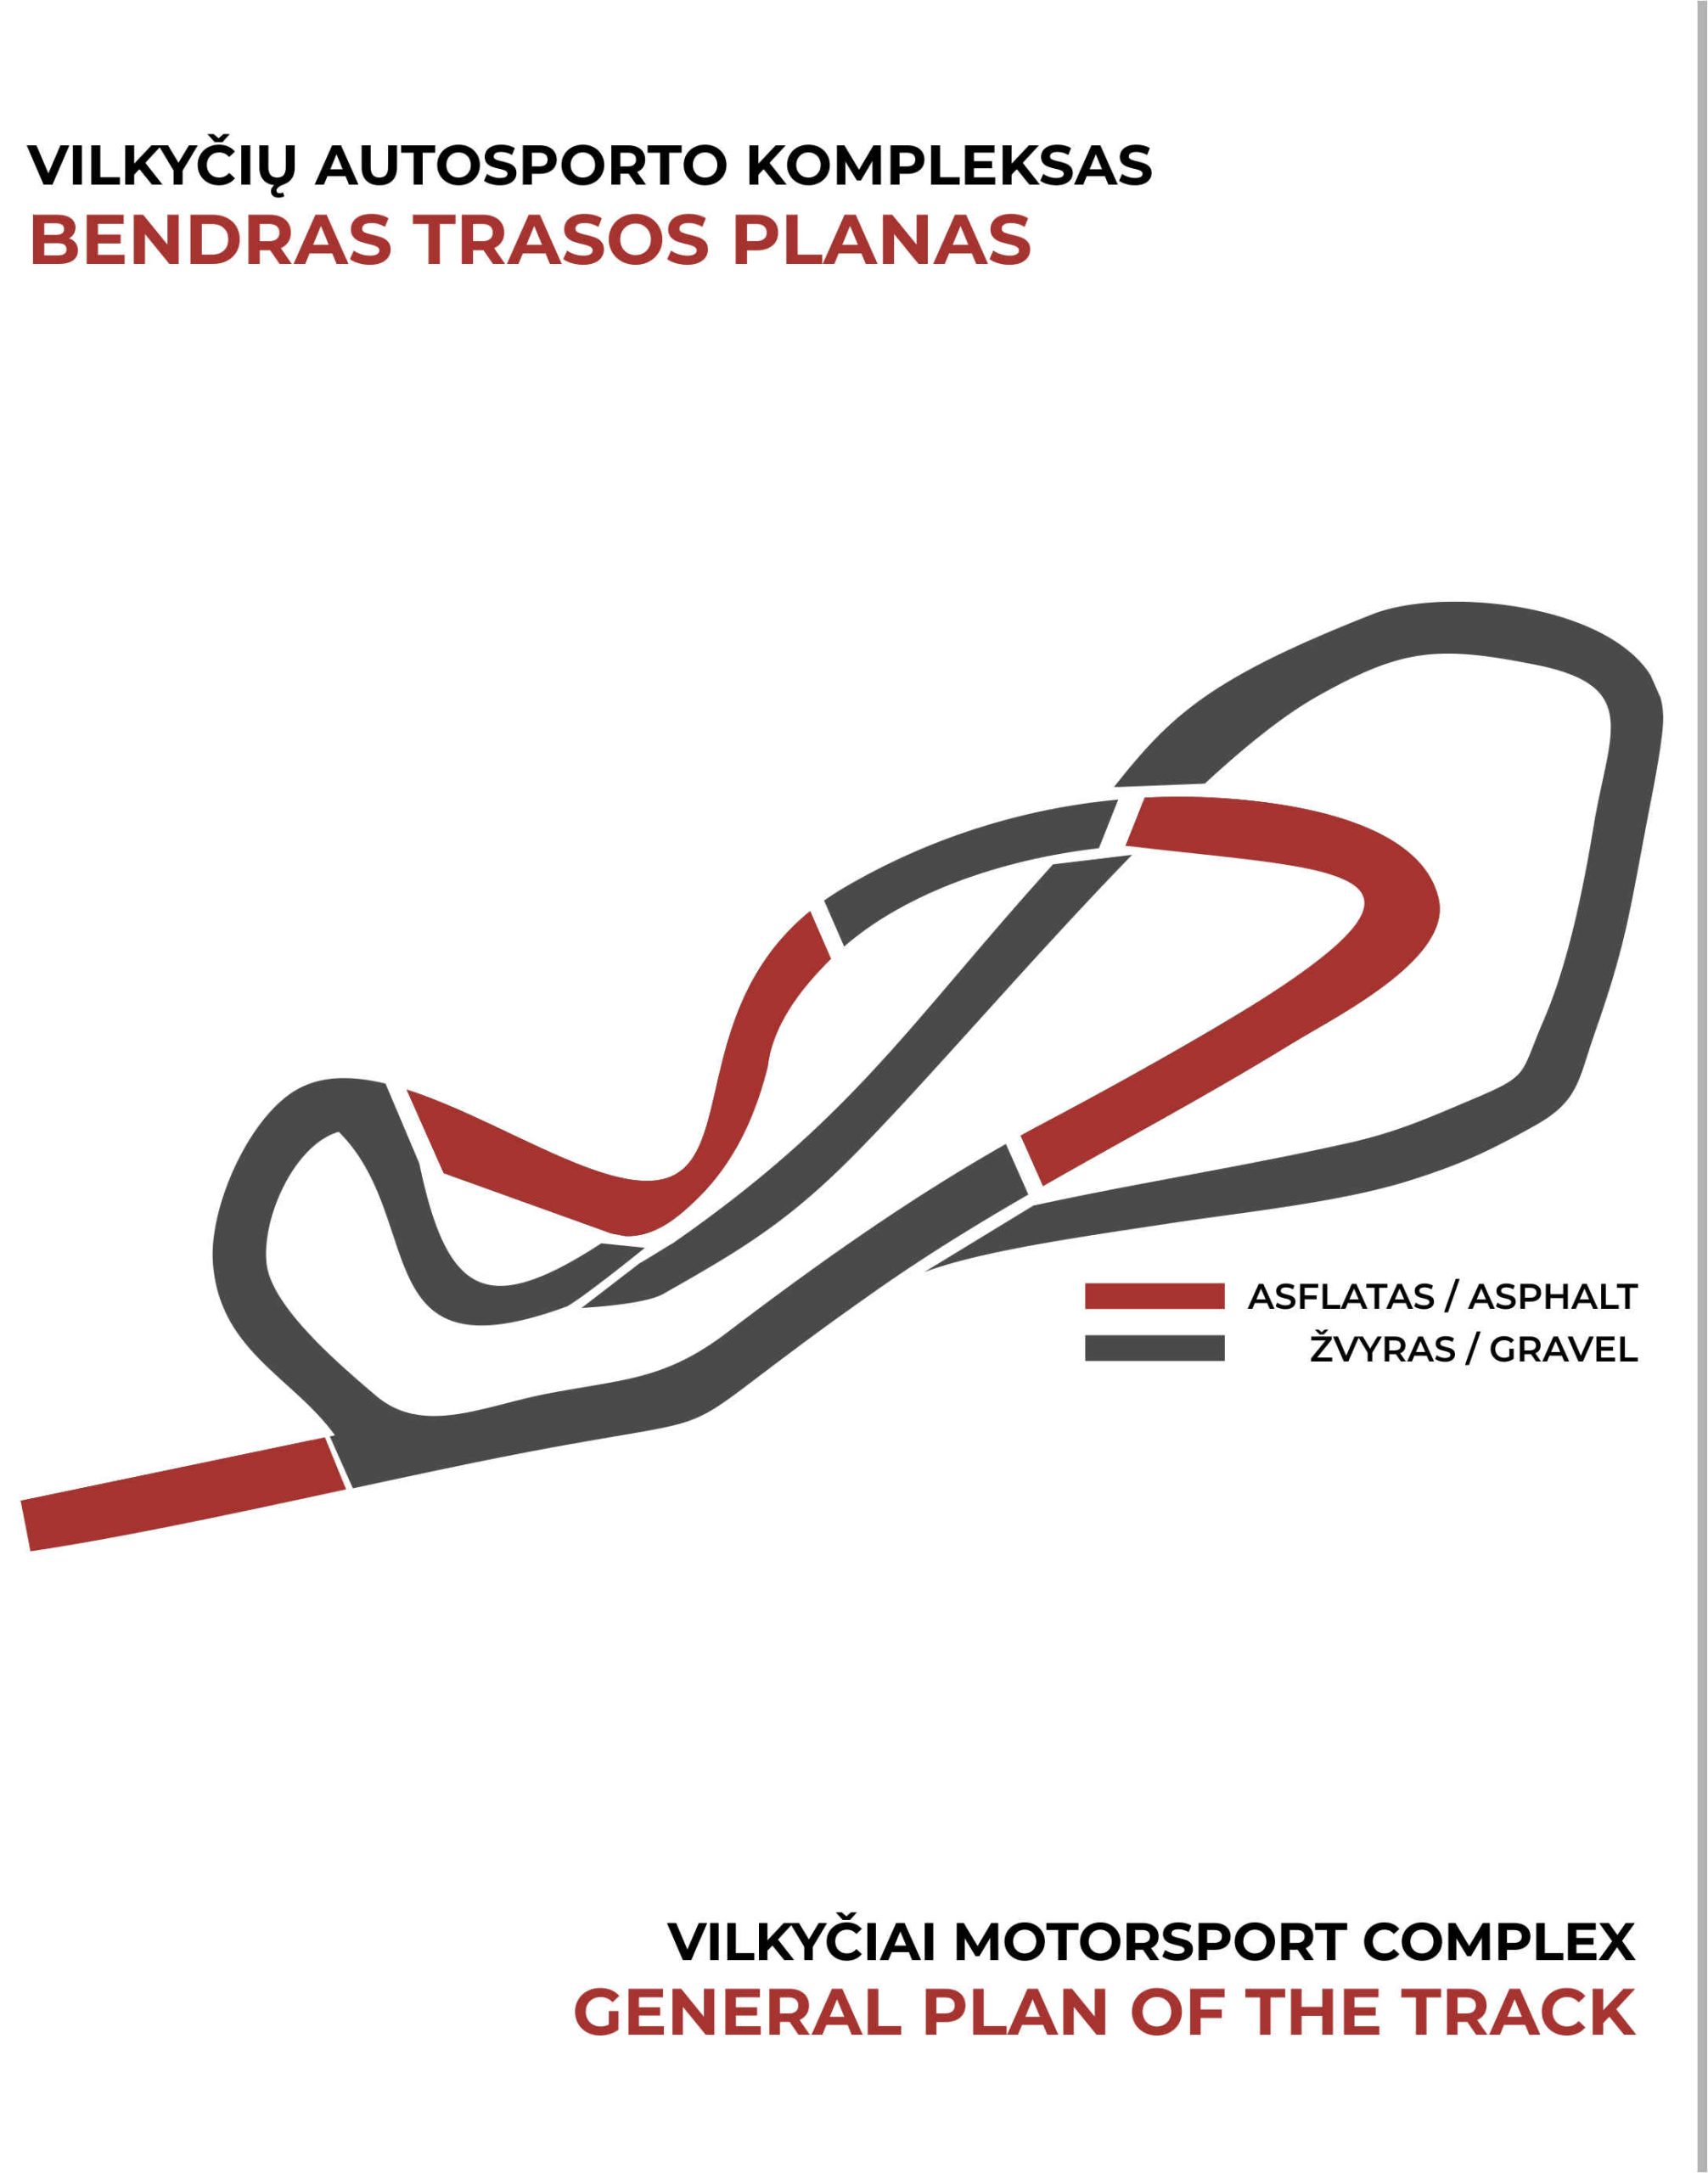 Features of the track